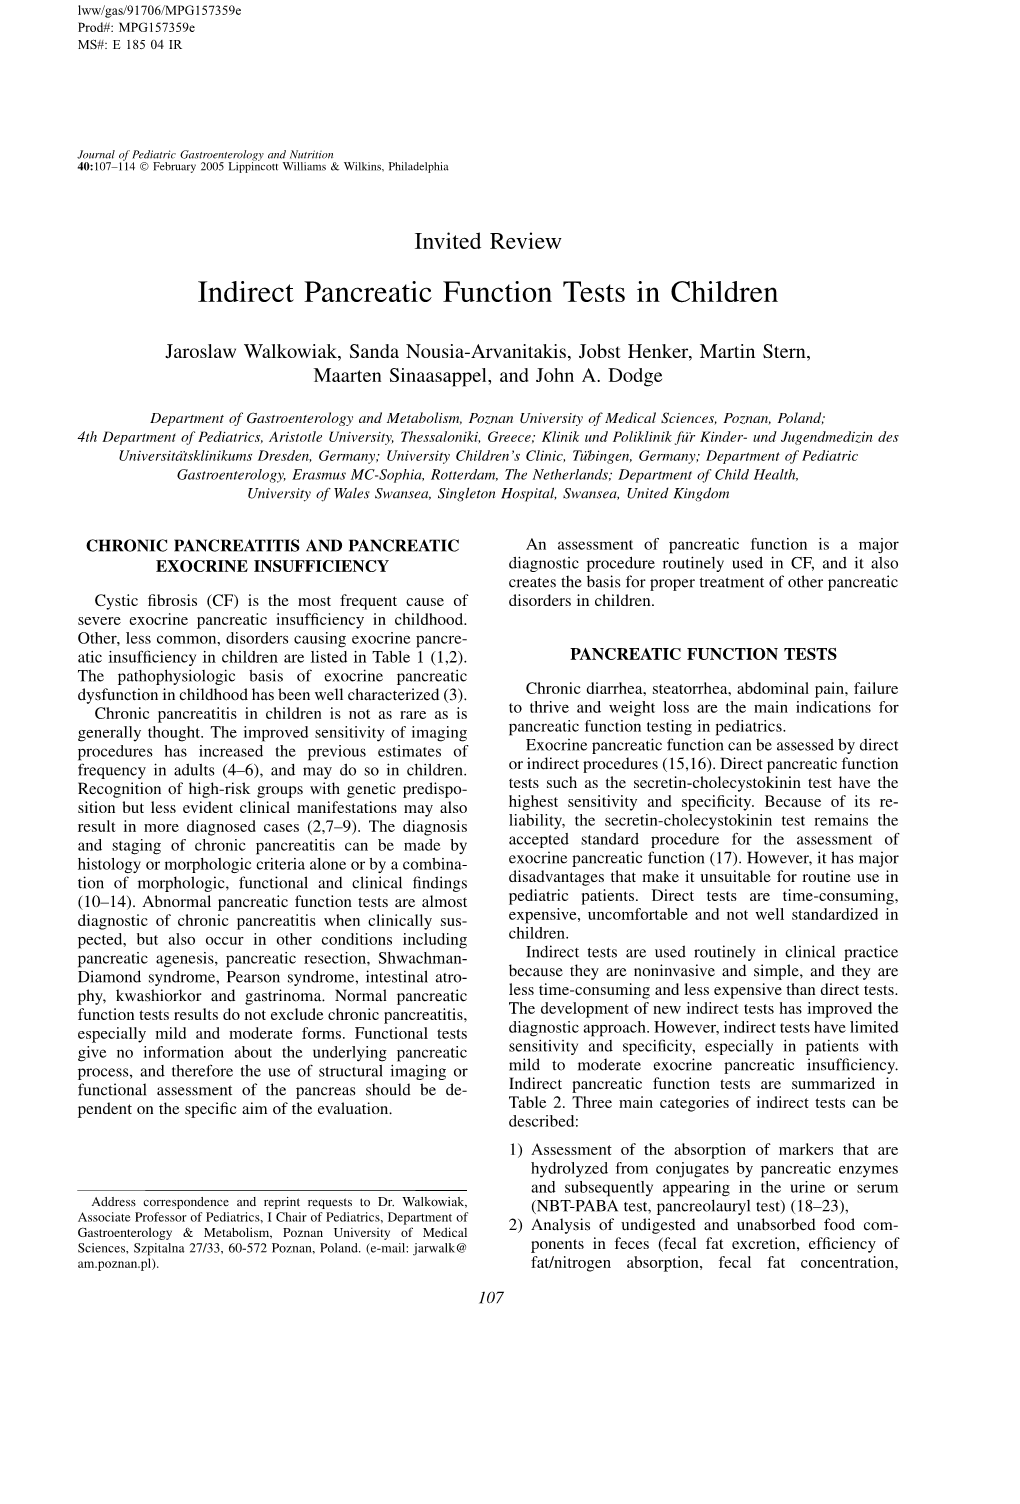 Indirect Pancreatic Function Tests in Children